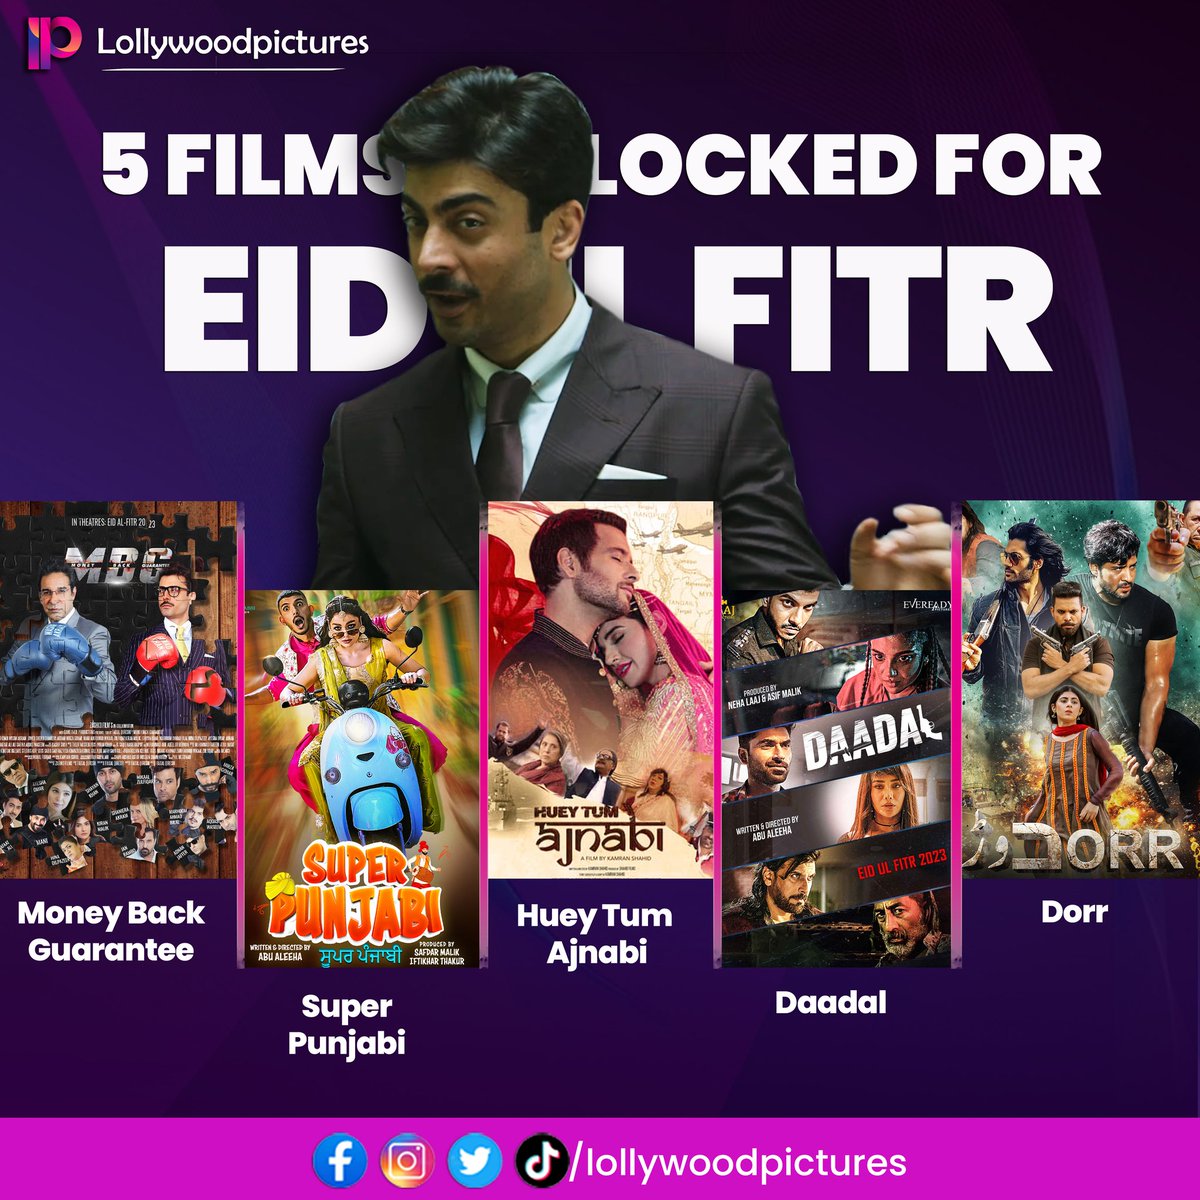 It is a big joke to the Pakistan film industry to release 5 Films simultaneously on Eid when cinemas remain deserted all year round and the audience has nothing to watch. 

Such an industry should be given the title of Eid Film Industry instead of #PakistanFilmIndustry.